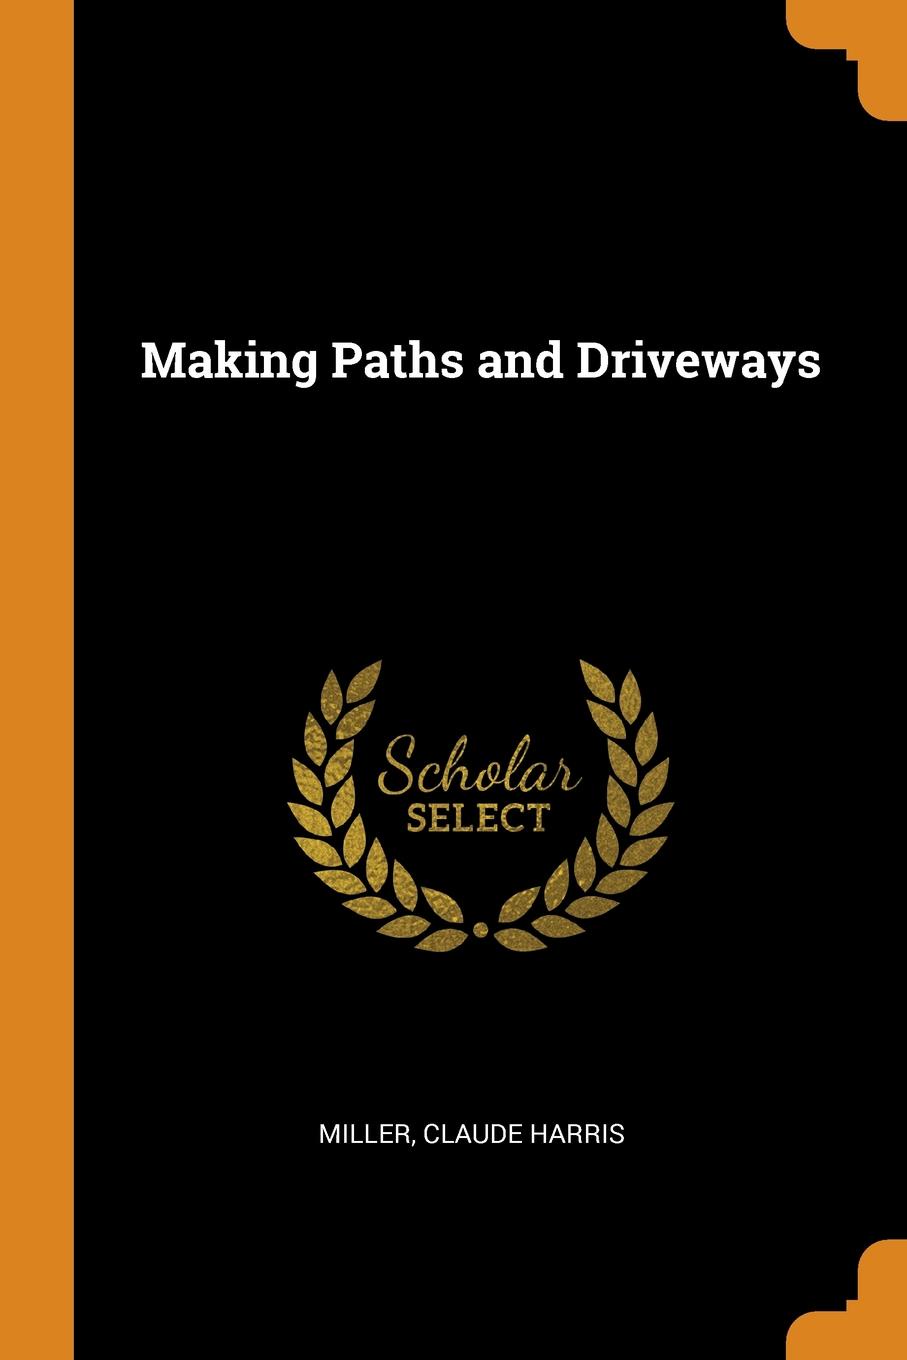 Making Paths and Driveways